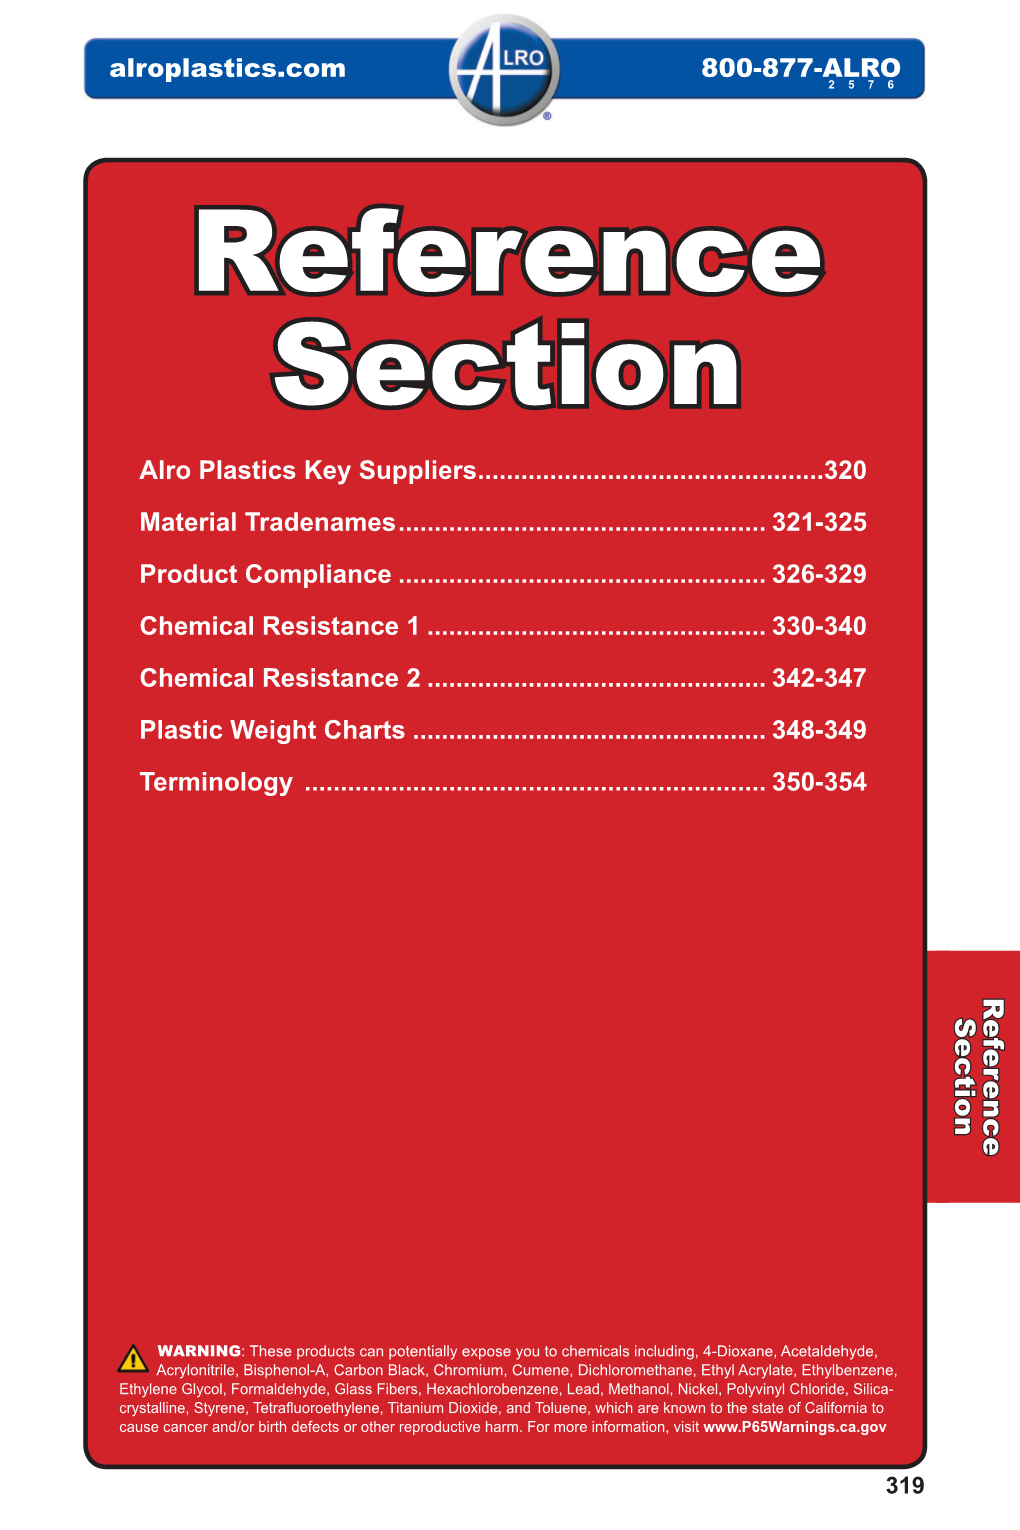 Reference Section Alro Plastics Key Suppliers